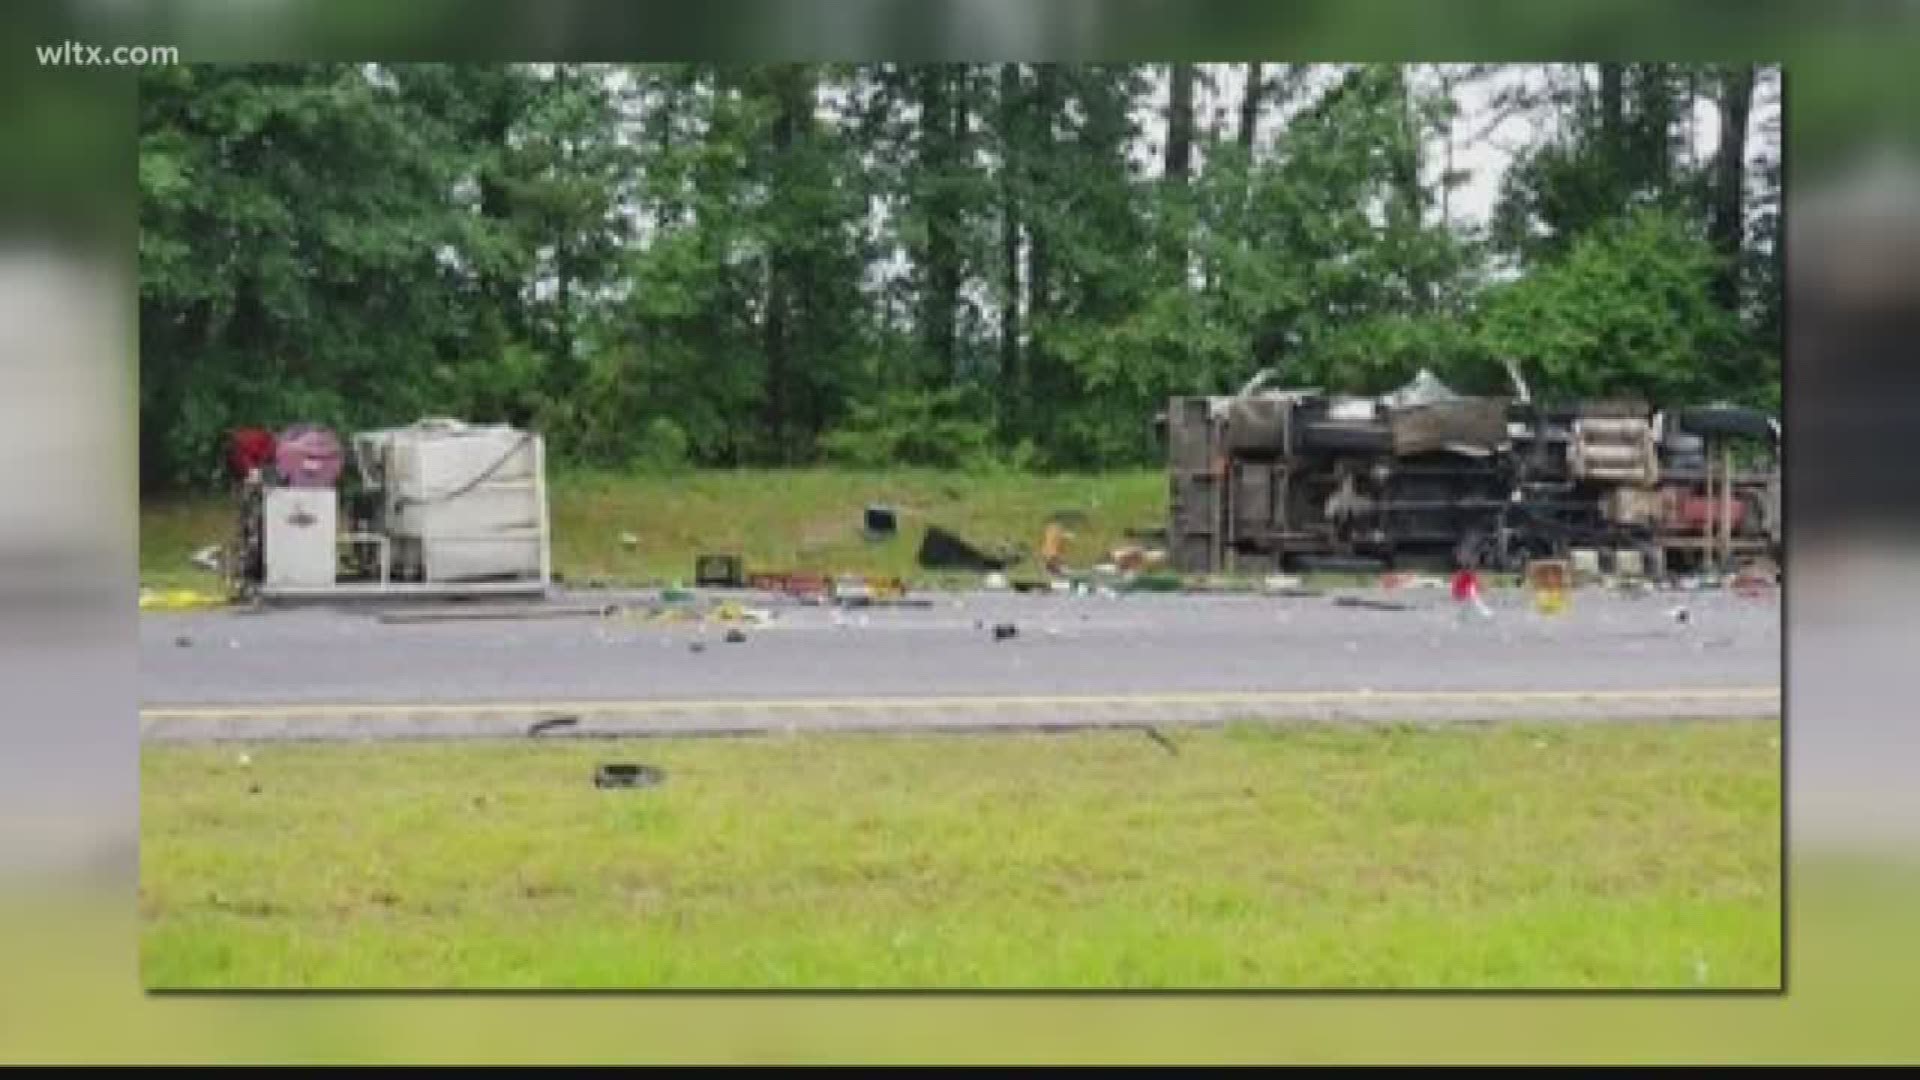 All lanes of I-26 near Orangeburg have reopened after a tractor trailer closed the eastbound lanes for more than 3 hours Thursday morning.